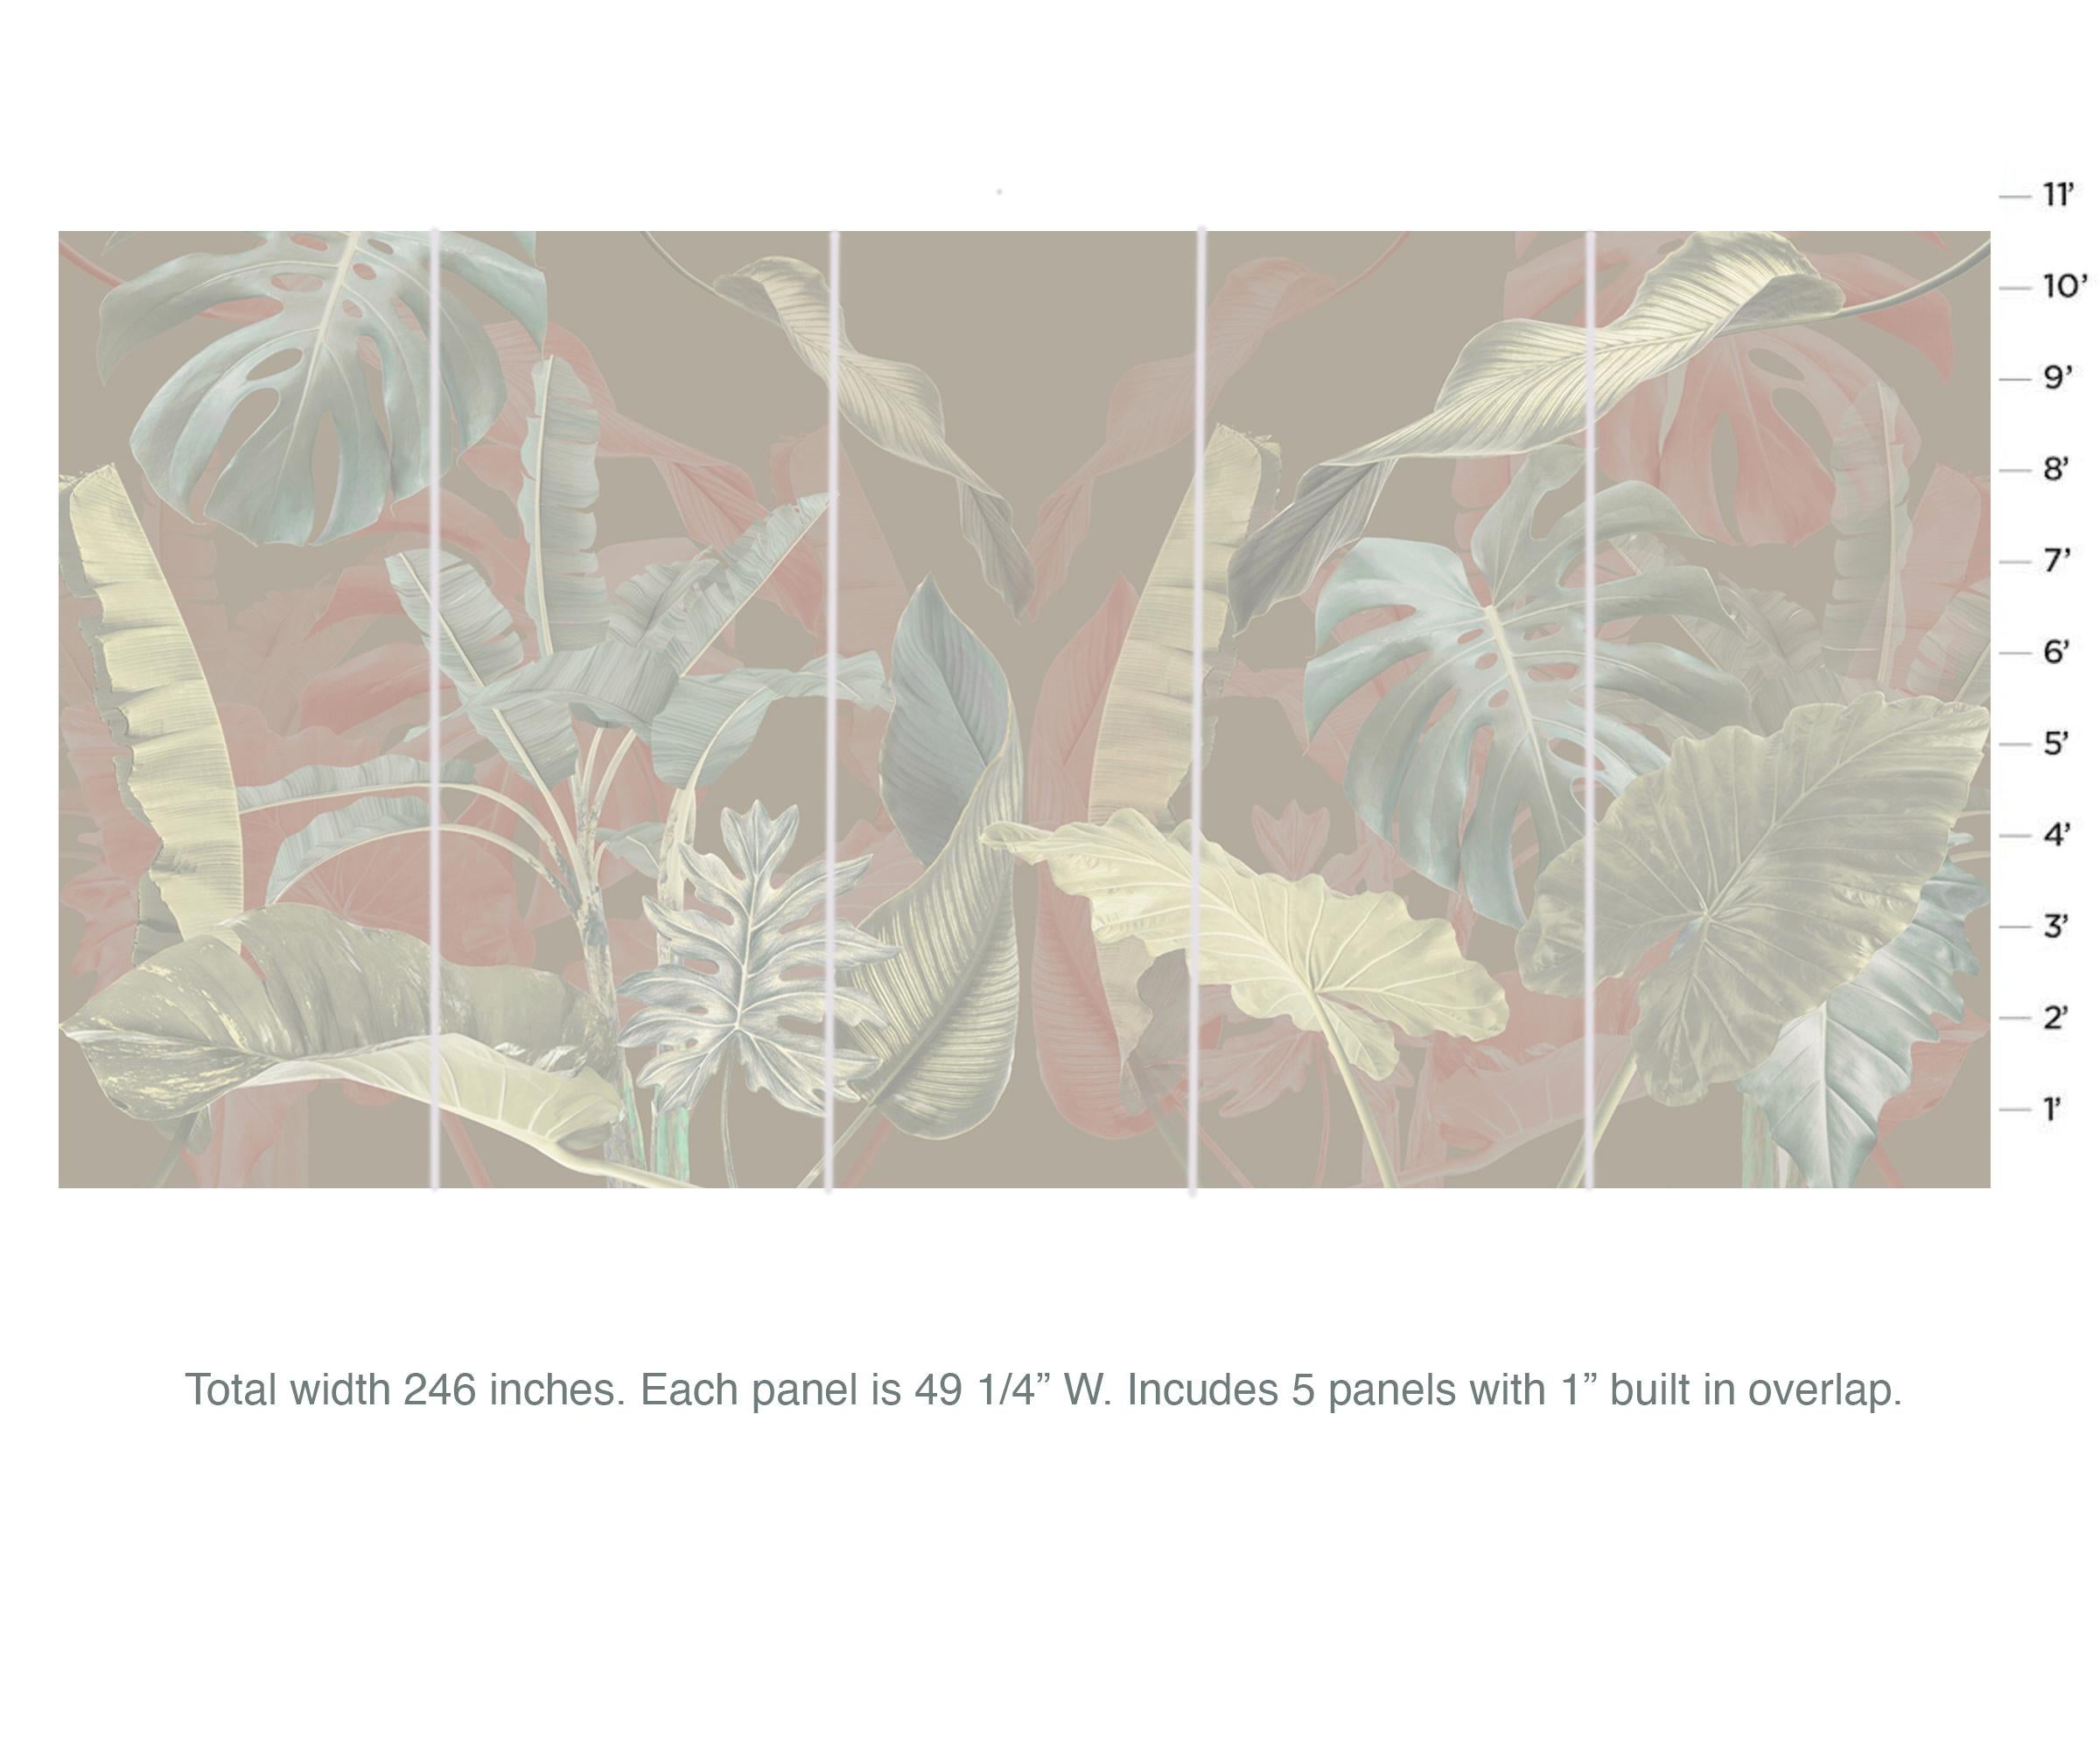 American EDGE Collections JungleScape Nightfall; a whimsical nod to endless Summers For Sale